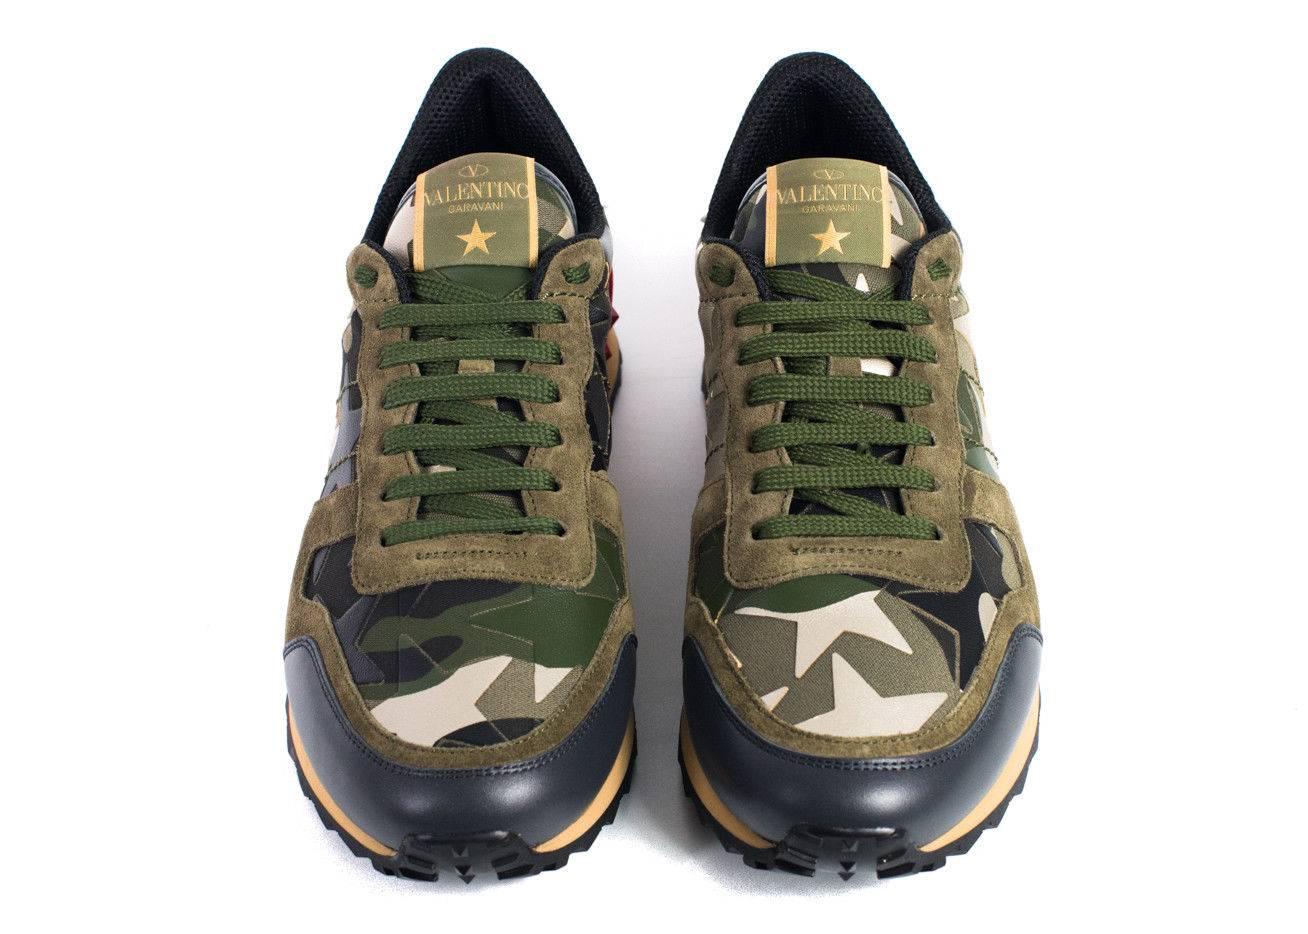 Brand New Valentino Camustar Rockrunner
Original Box & Dust Bag Included
Retails in Stores & Online for $895
Size IT39.5 / US6.5 Fits True to Size

Valentino's Rockrunner trainer sneakers with their signature "camustar" print on